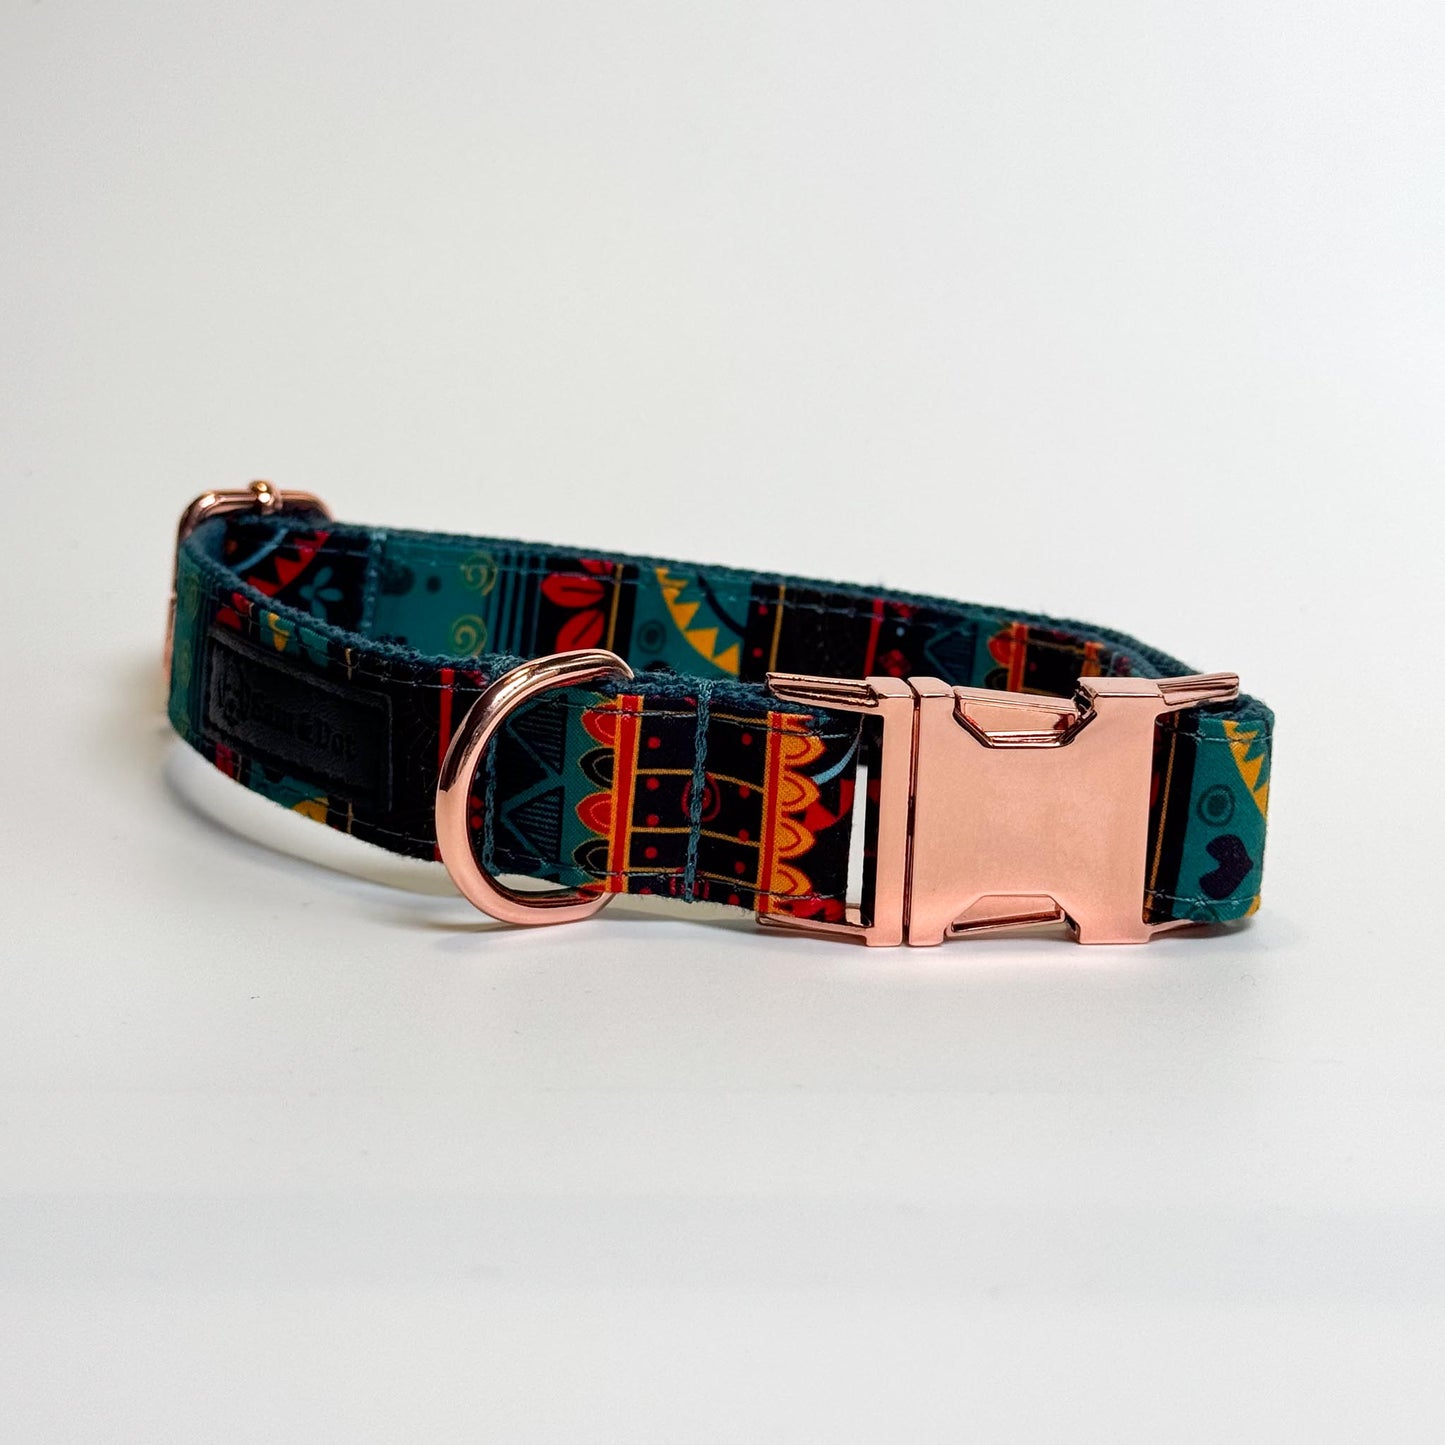 Night Forest Engraved Dog Collar - Sam and Dot